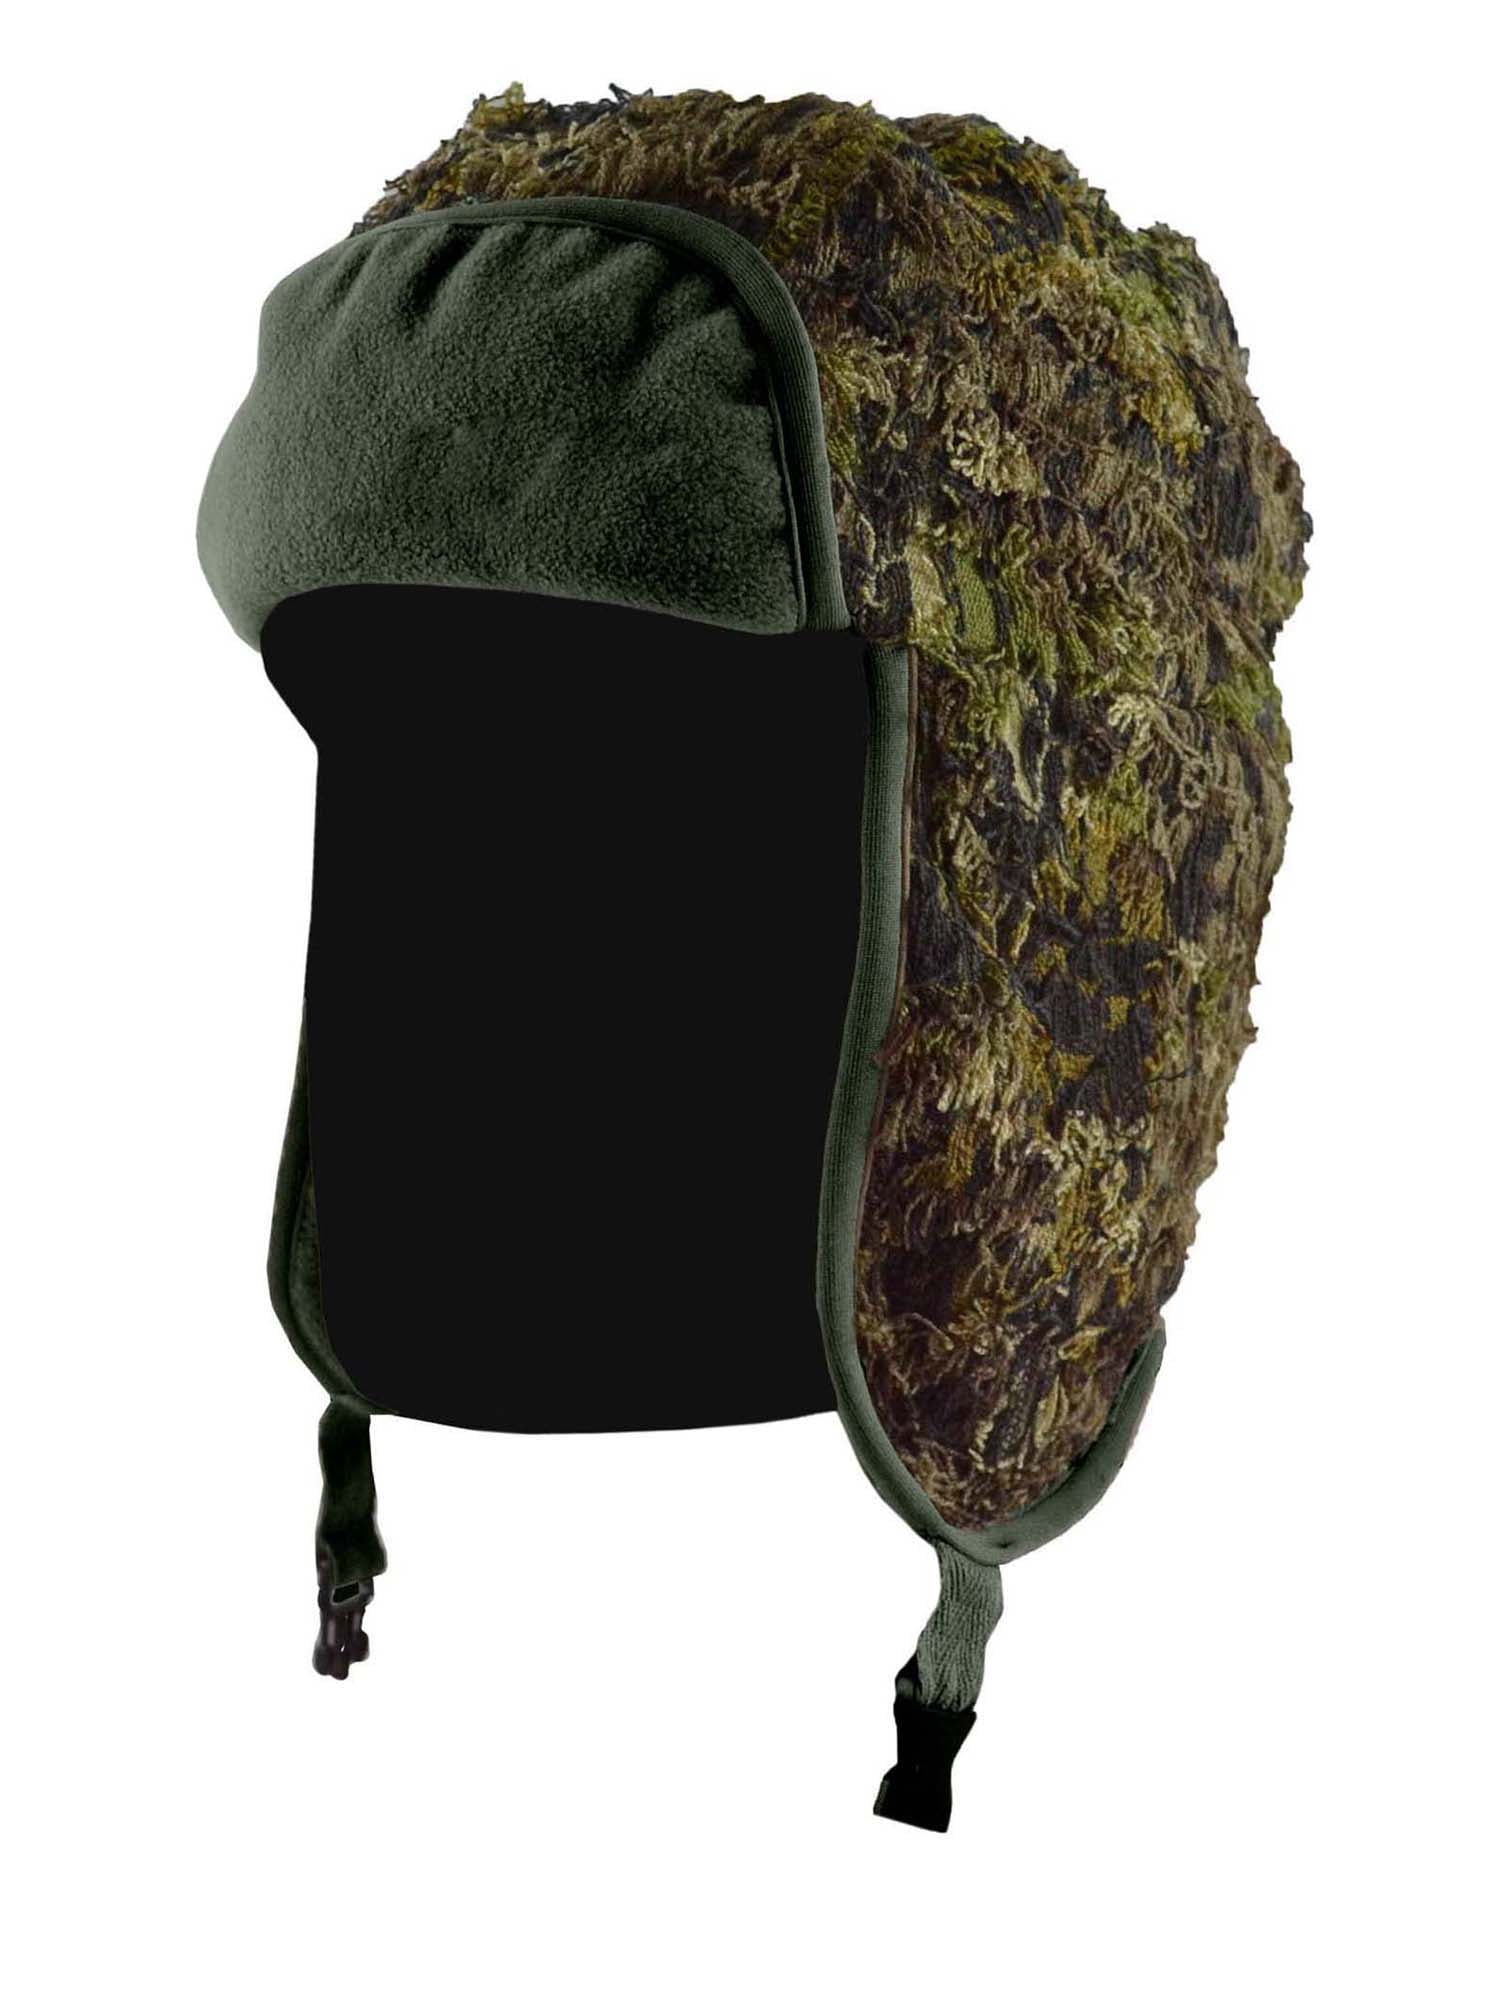 W88 MENS BREATHABLE RUSSIAN WOODLANDS CAMOUFLAGE SHOWER PROOF TRAPPER SKI HAT 